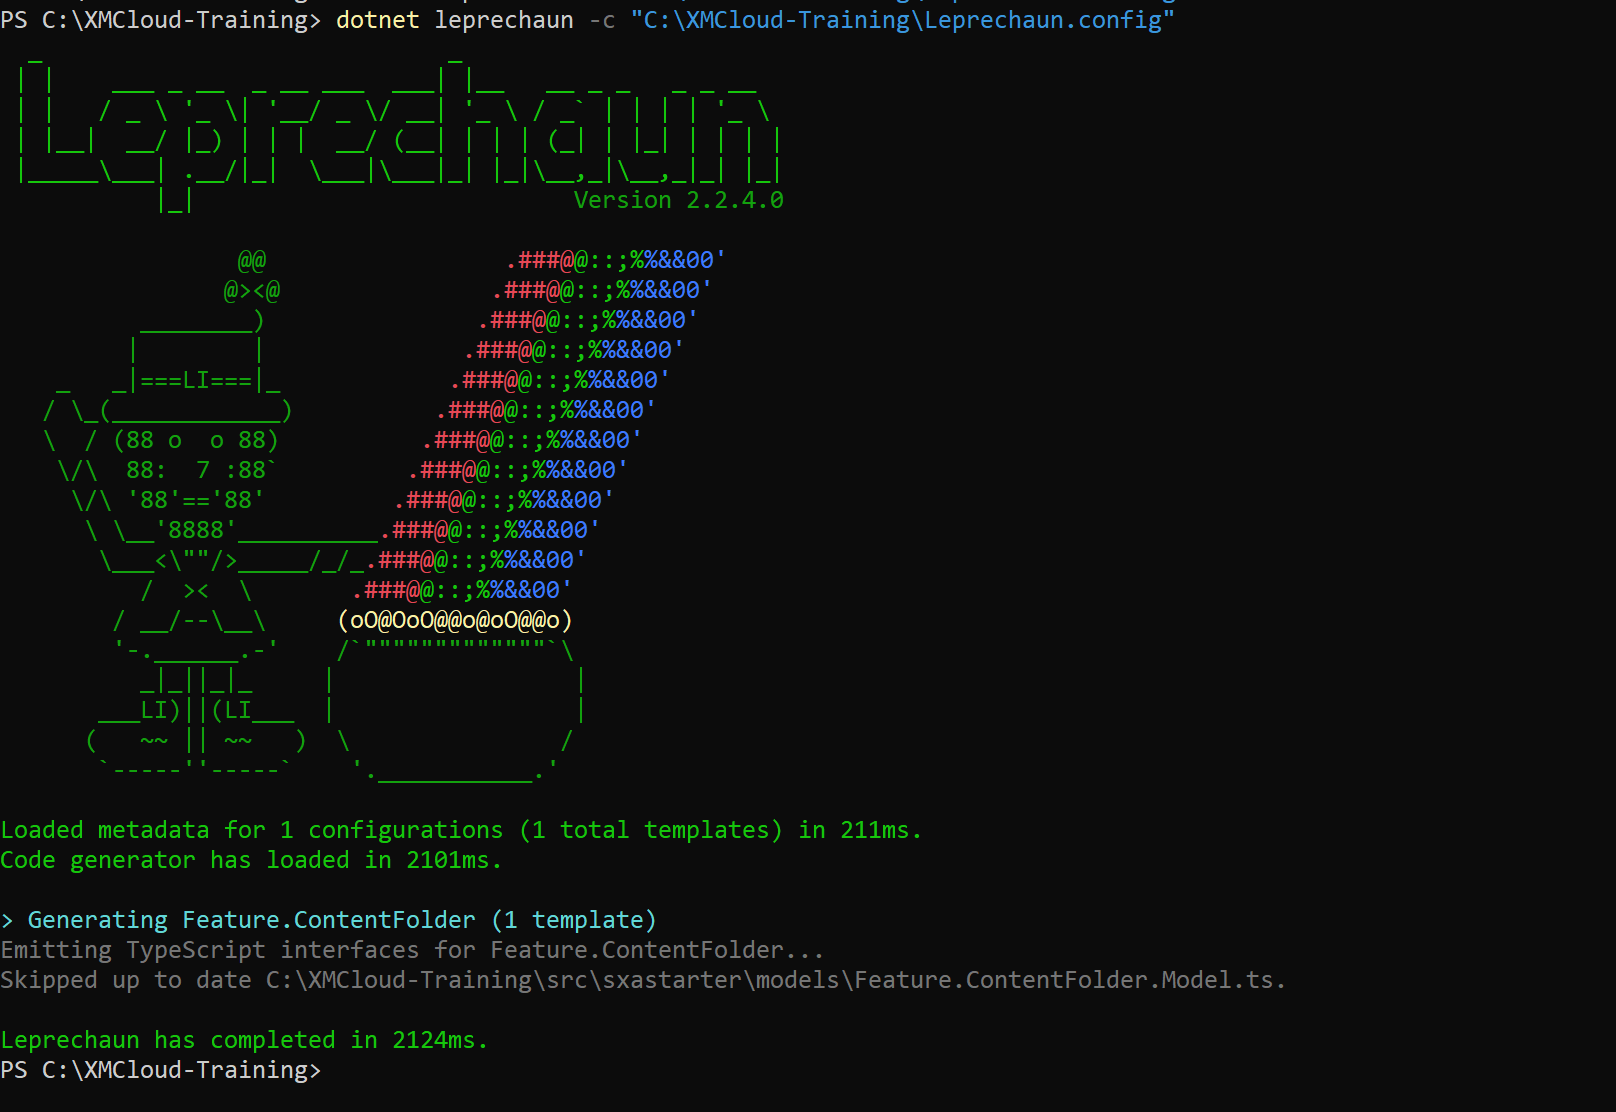 Terminal view of Leprechaun generating models with complete process details.